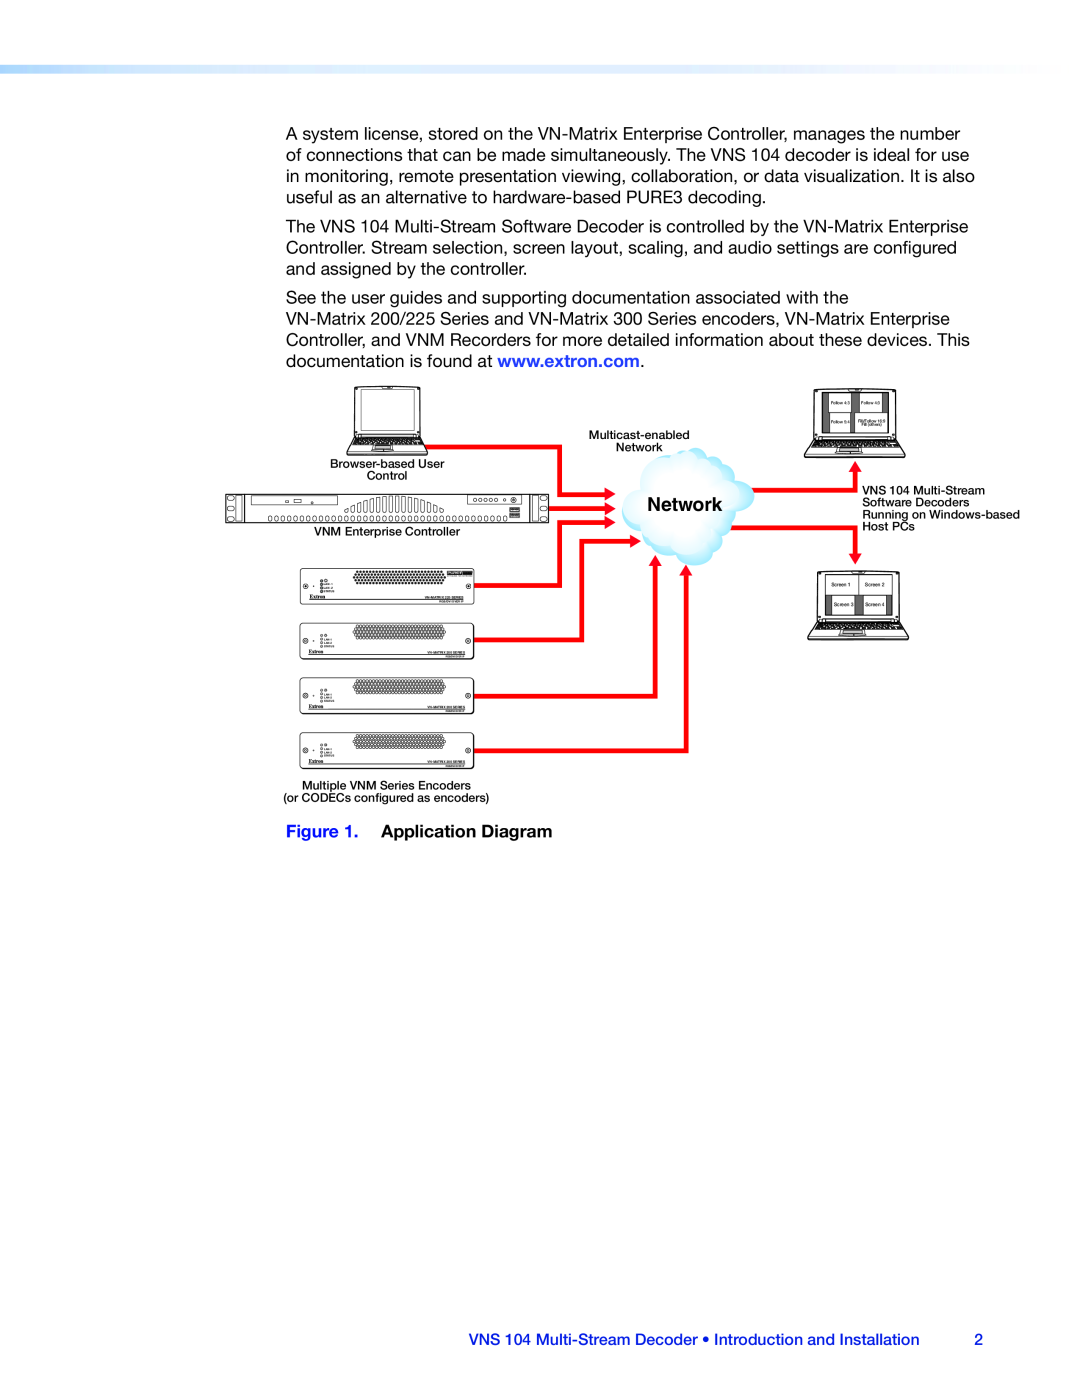 Extron electronic VNS 104 manual Network, Application Diagram 